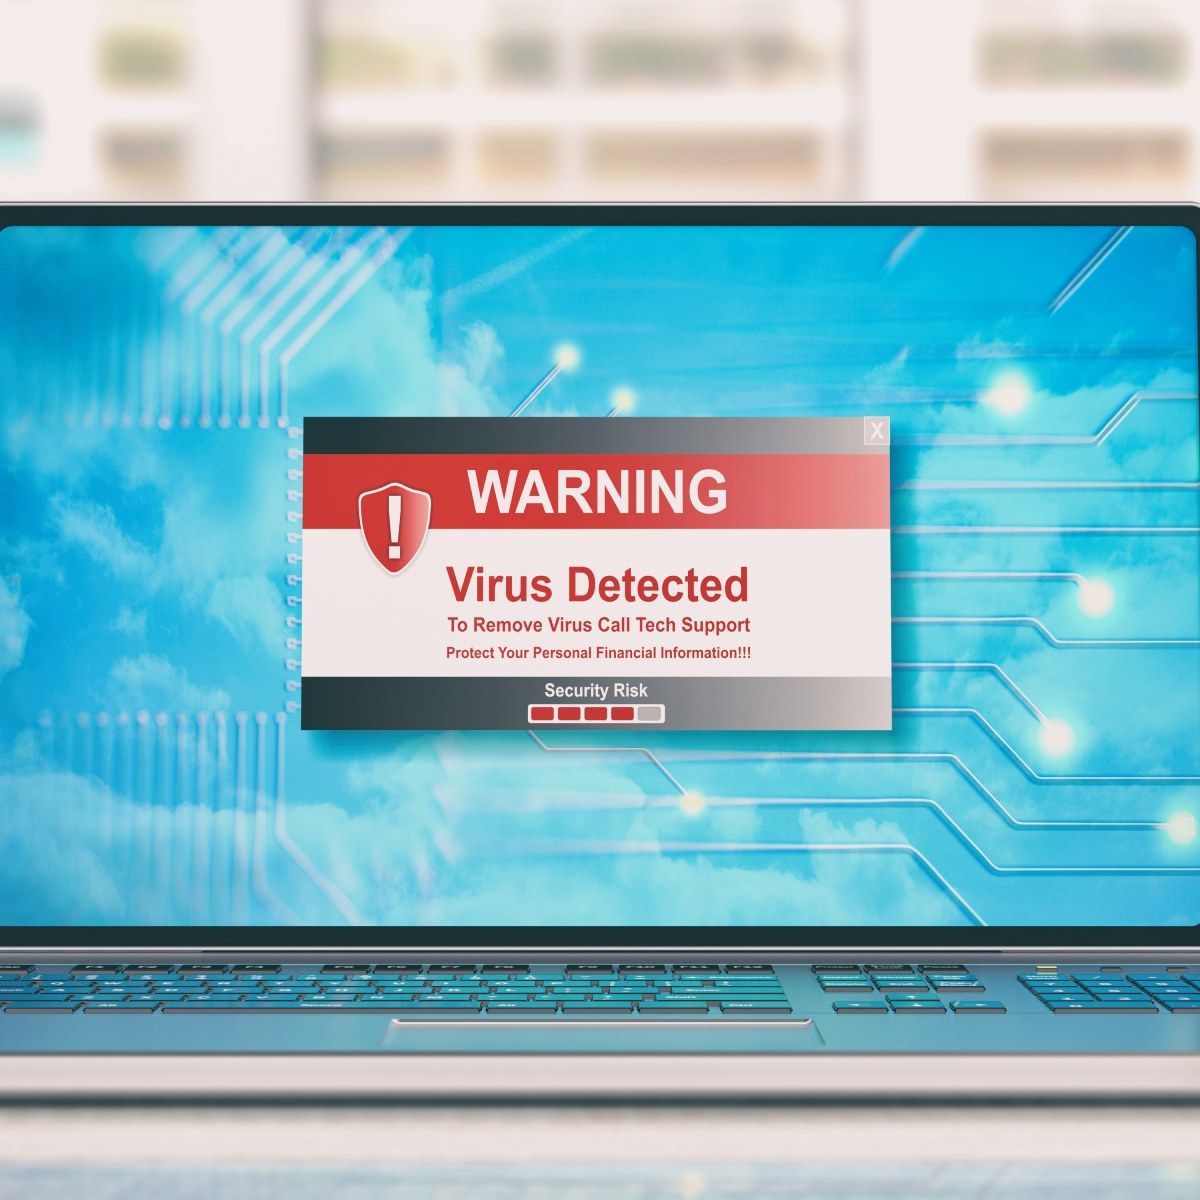 A laptop screen showing a red and white warning that a virus was detected